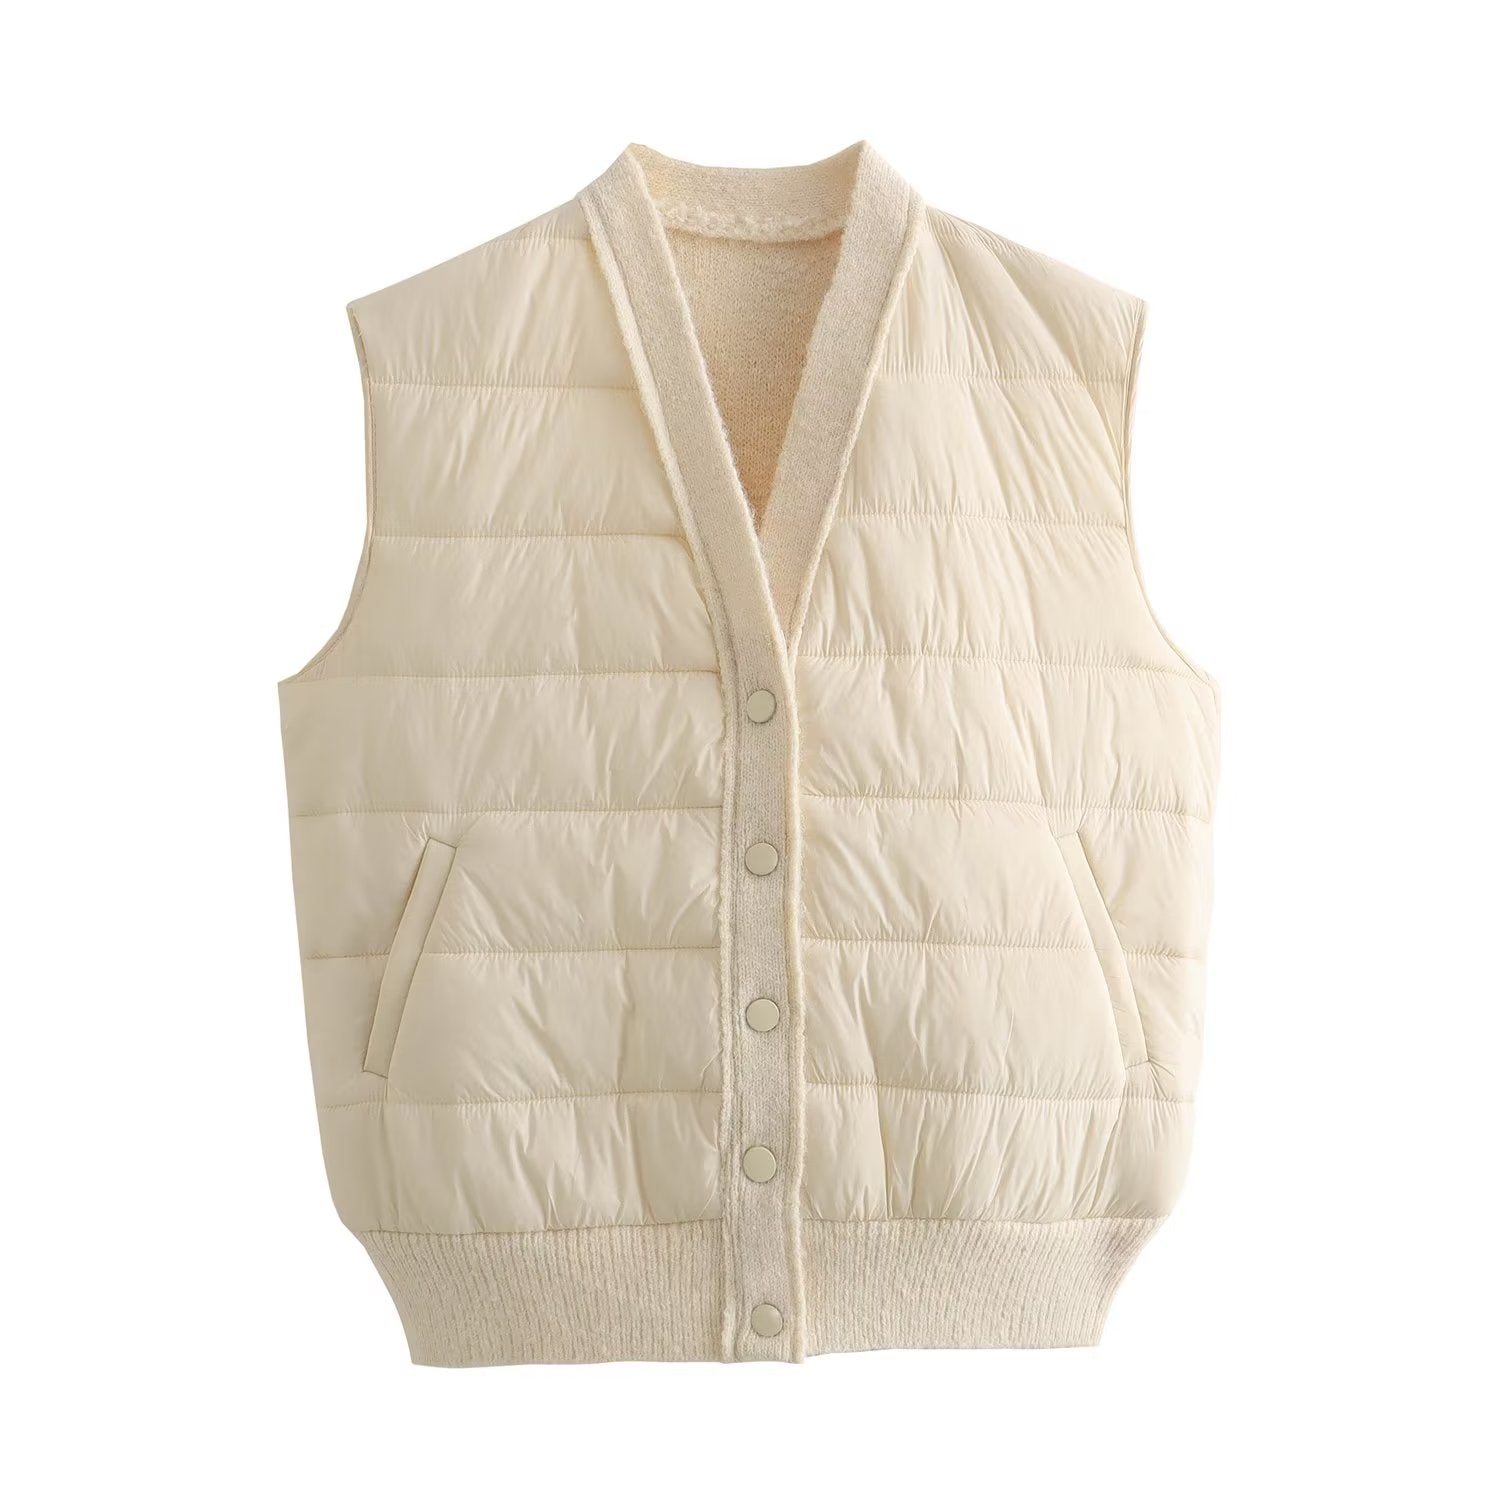 Fall Women Clothing Quilted V neck Patchwork Sleeveless Waistcoat Vest